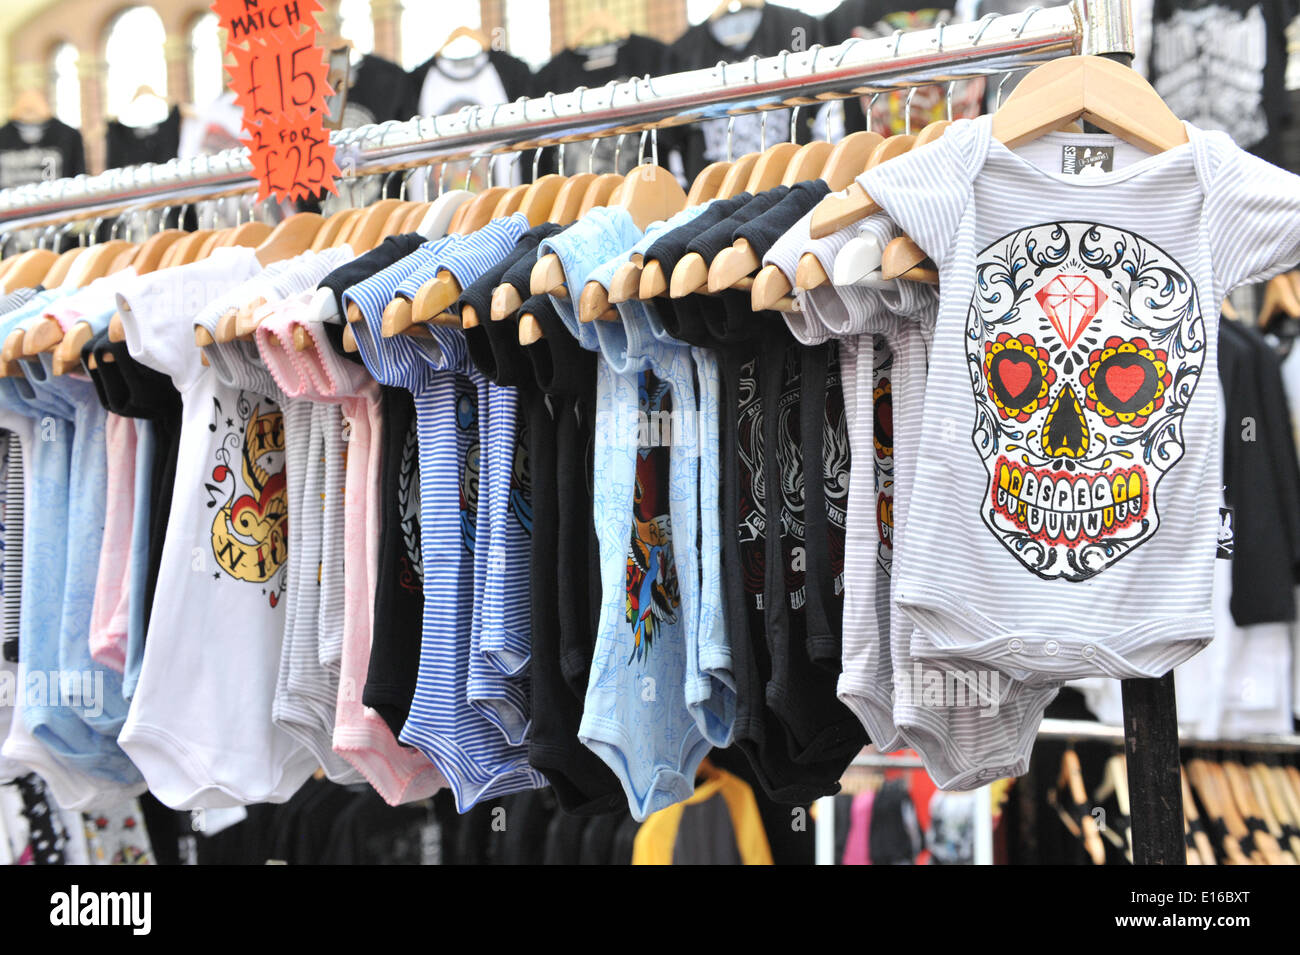 Alexandra Palace, London, UK. 24th May 2014. Childrens clothes on sale at a stall of curiosities. The show features tattooing,  stall selling clothing and accessories, wrestling and a fashion show Credit:  Matthew Chattle/Alamy Live News Stock Photo